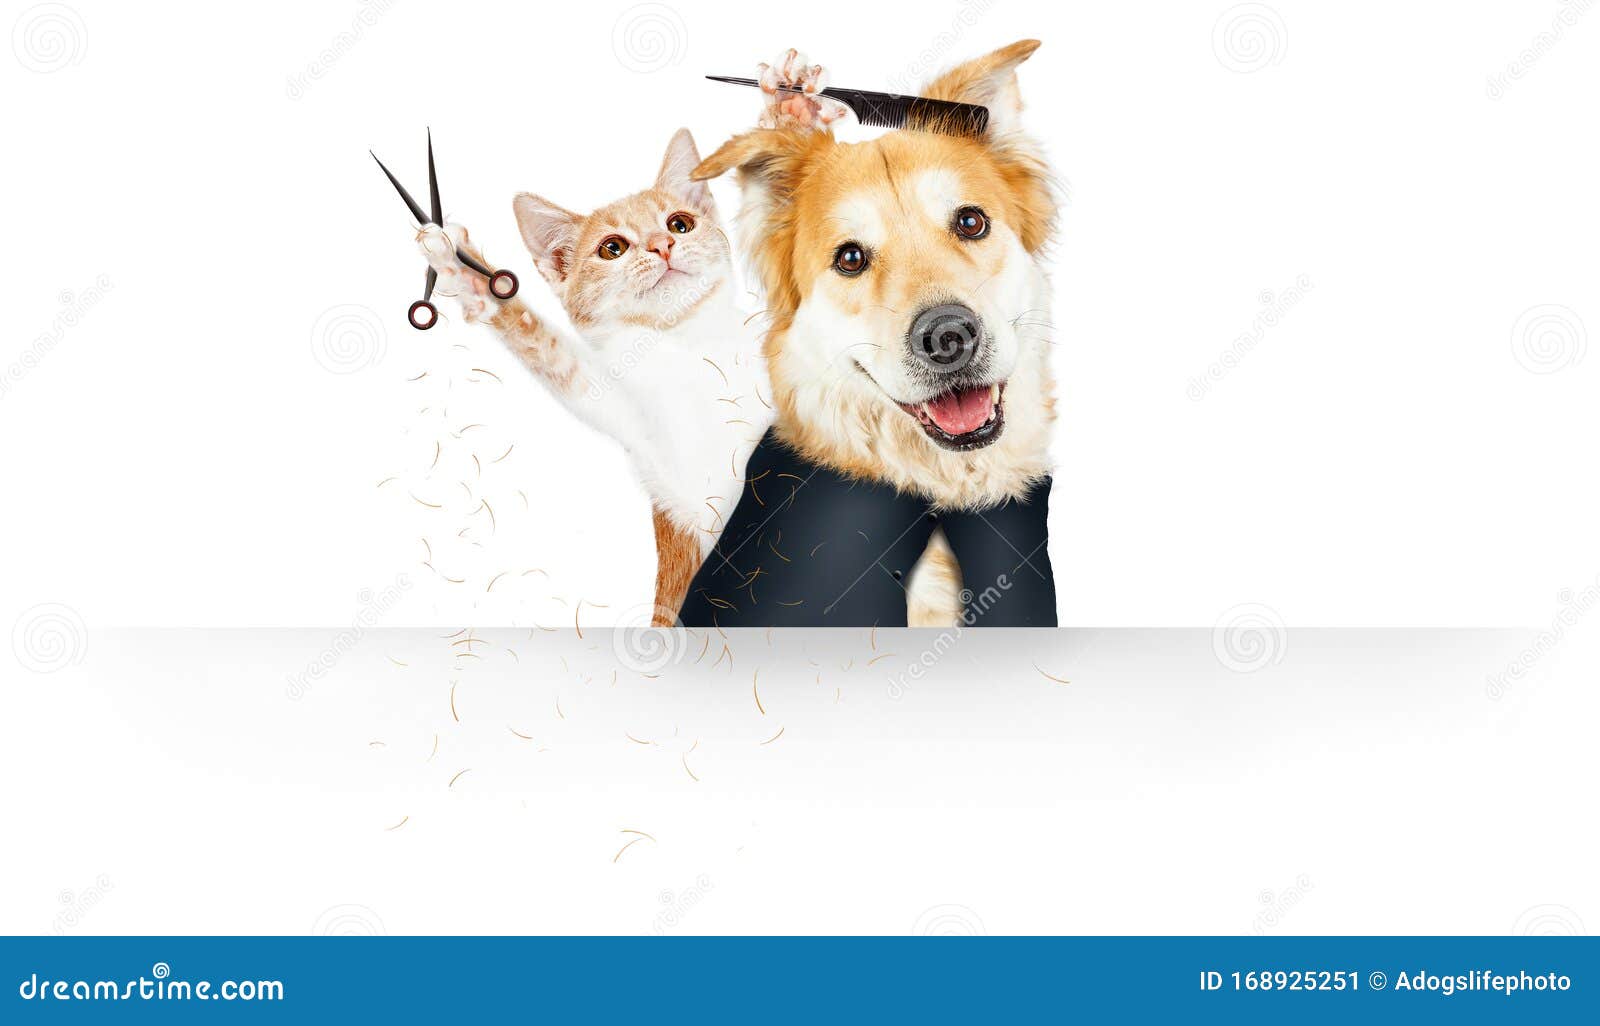 funny cat grooming dog web banner